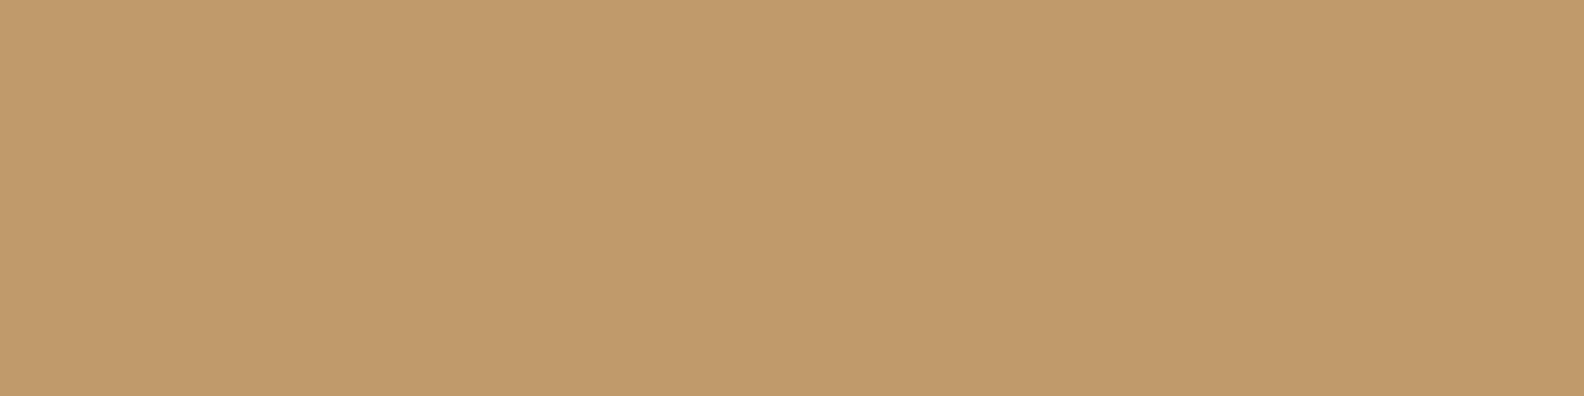 1584x396 Wood Brown Solid Color Background